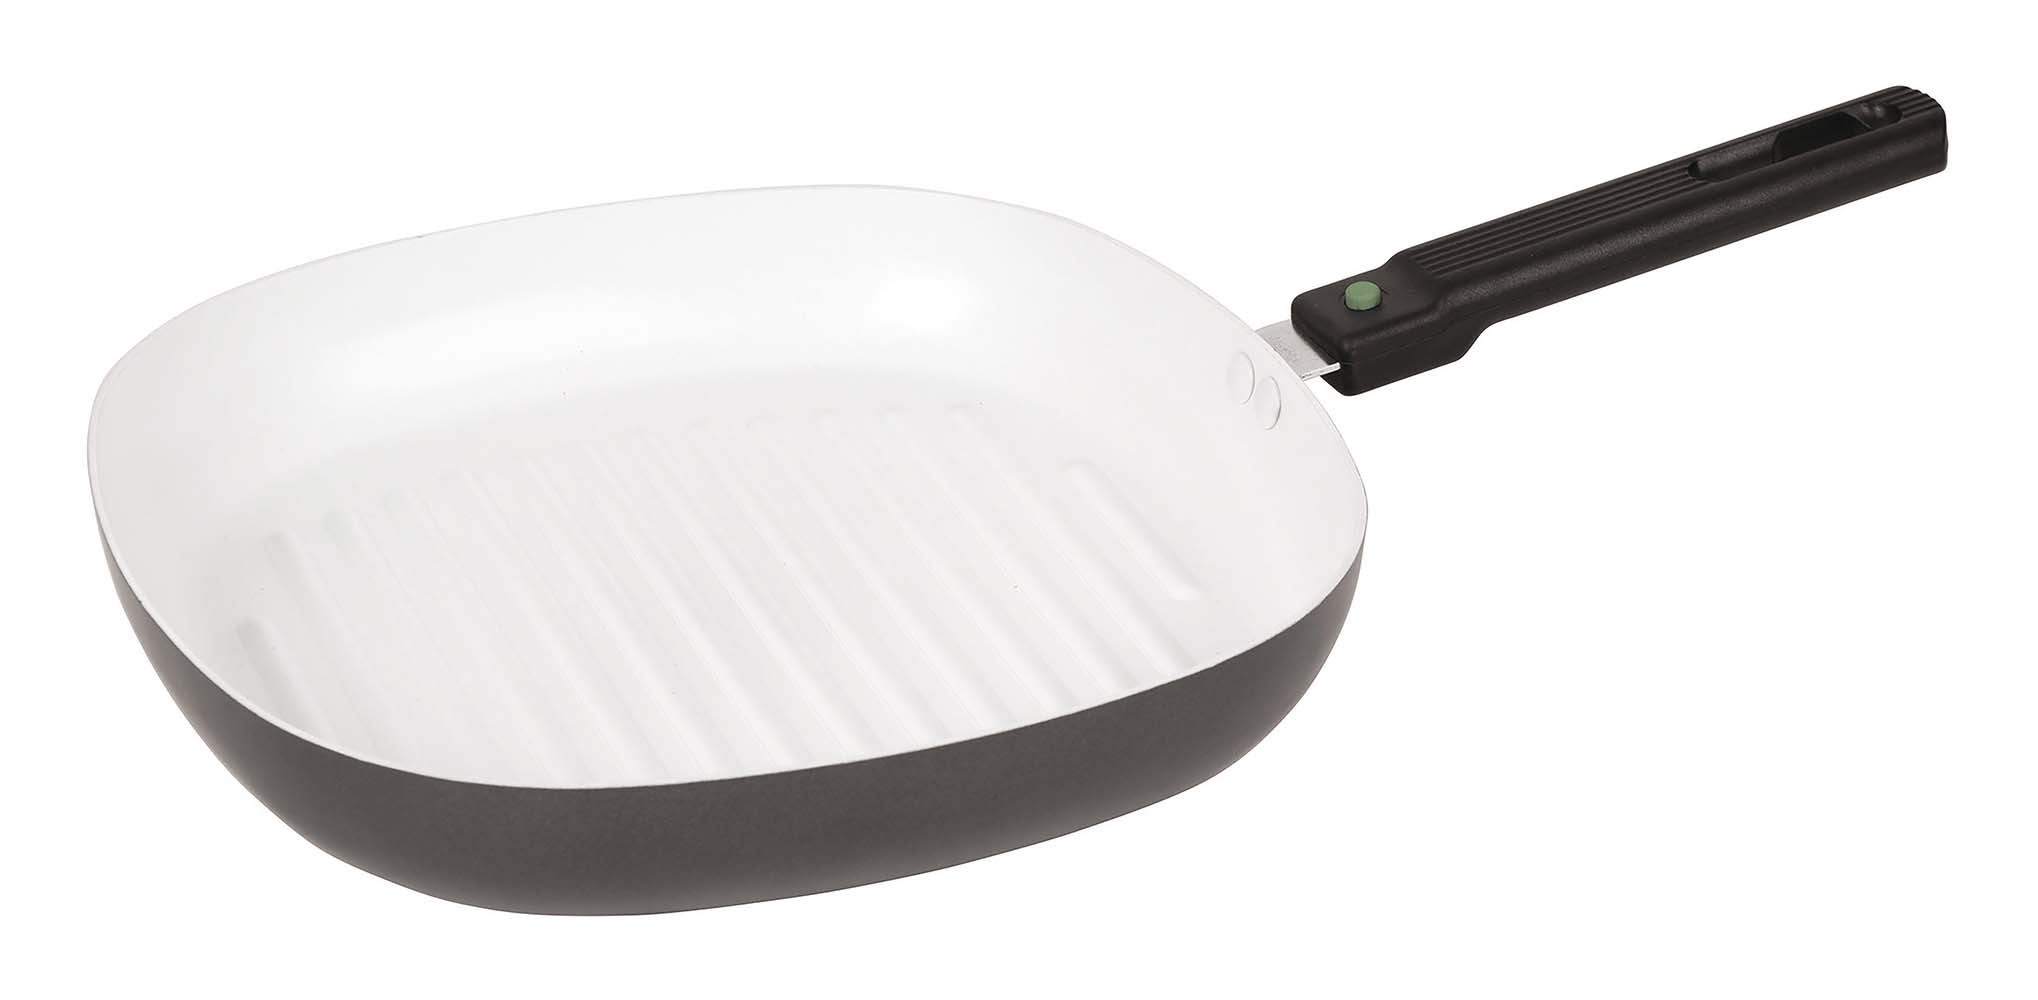 2304215 A compact grill pan with ceramic coating. This pan has a removable handle and therefore makes good use of space and is easy to take with you. Suitable for frying, but also suitable as an oven dish when the handle is removed. This pan comes with a scratch resistant non-stick layer. Thickness: 2.2 millimetres.